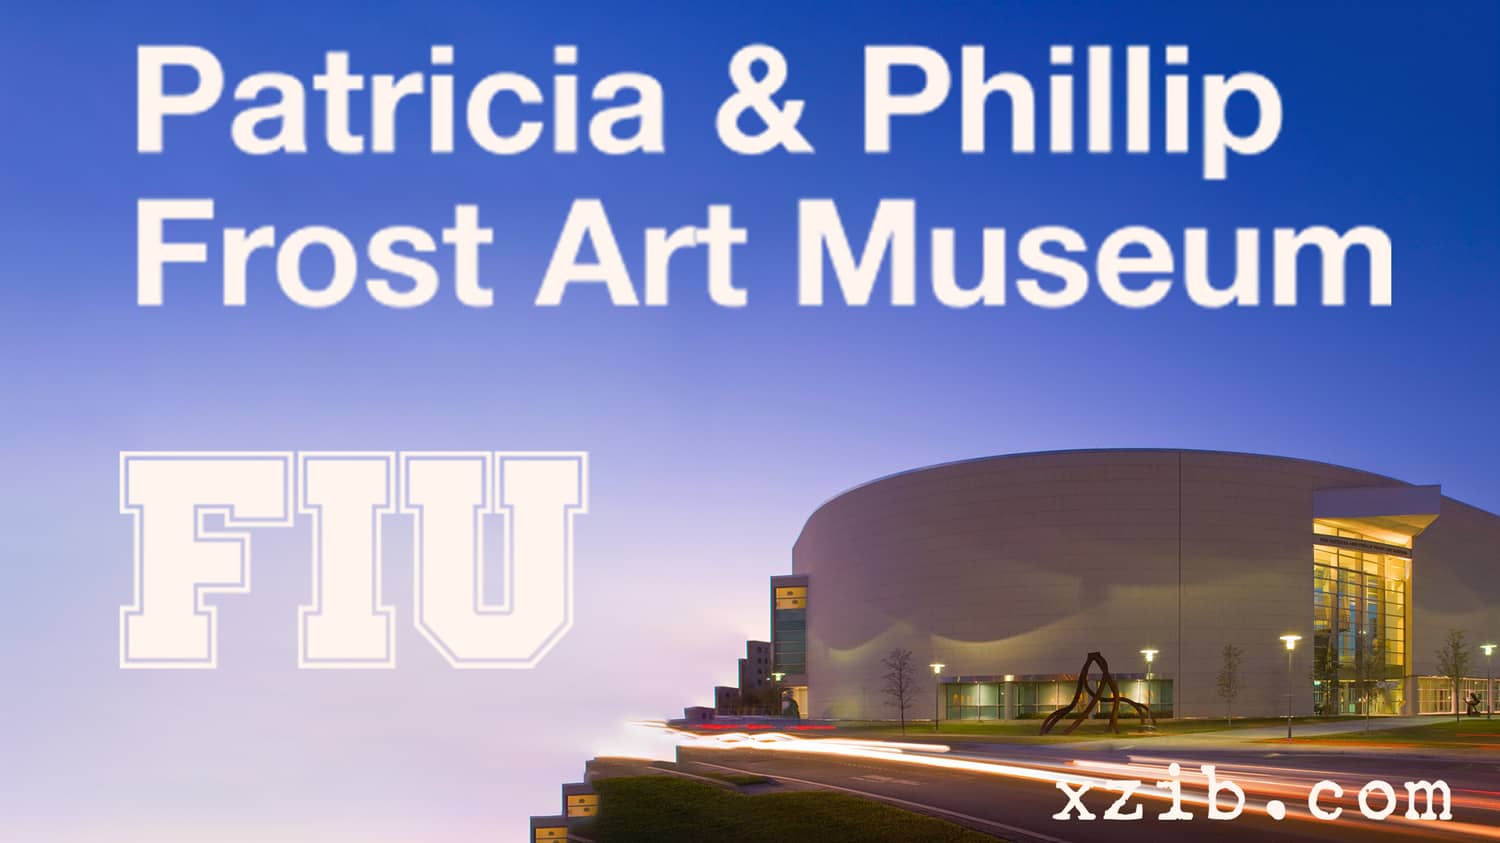 Miami Museums Frost Art Museum